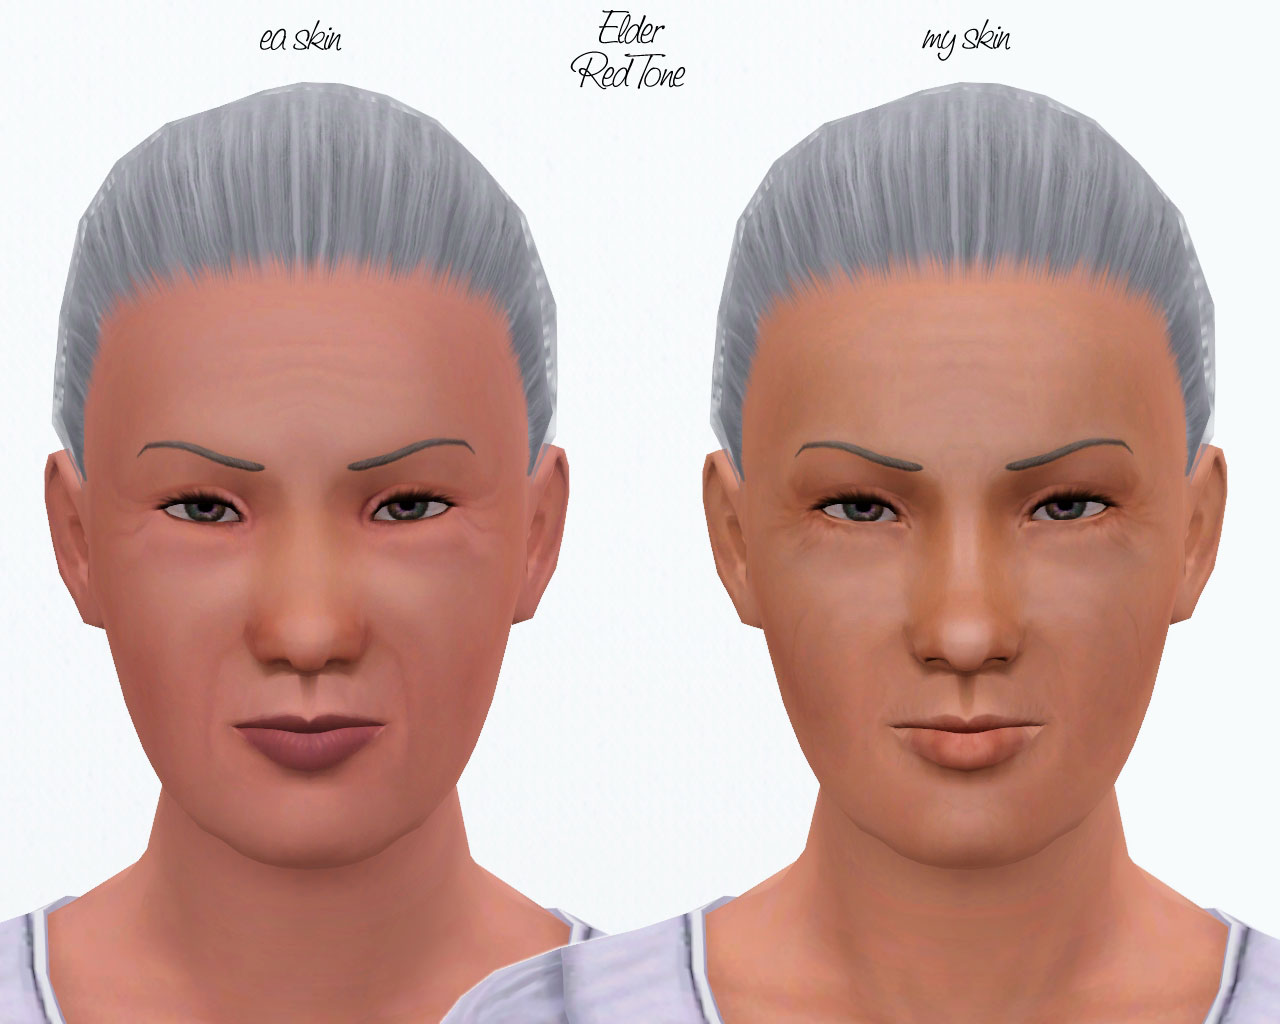 sims 3 non default skin how to use